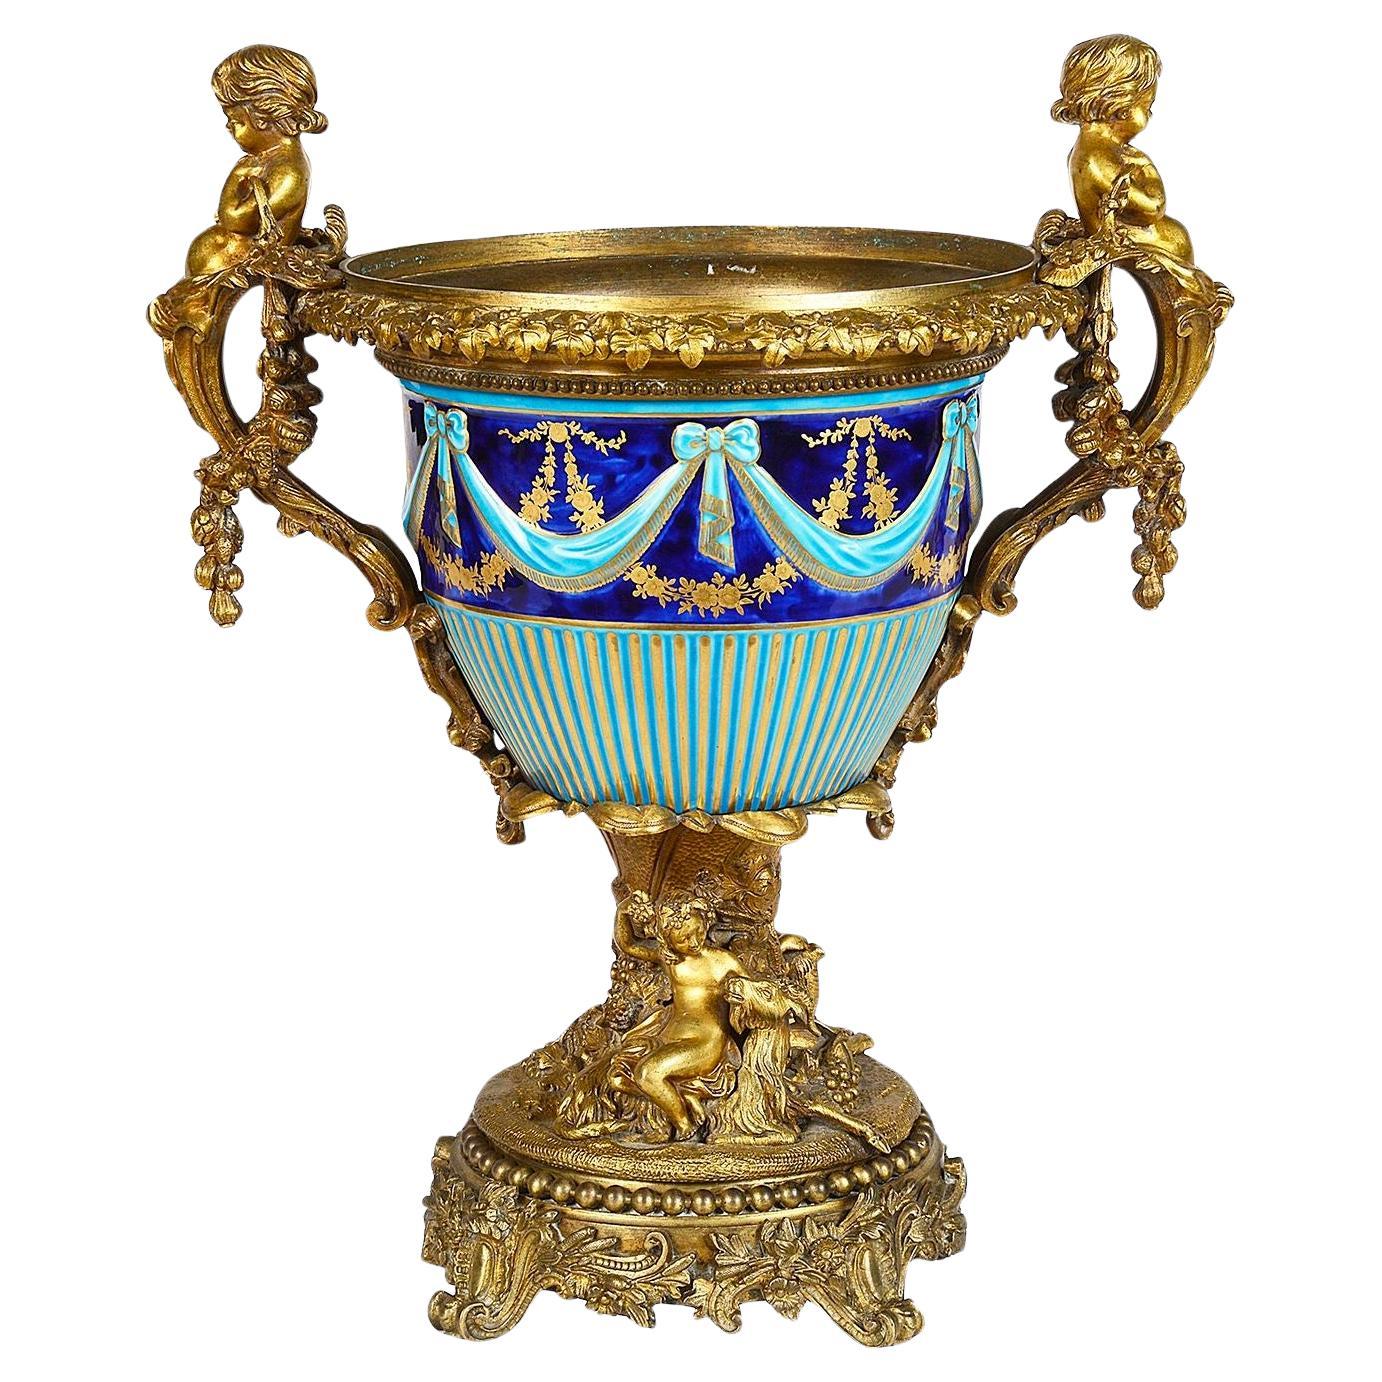 Classical 19th Century French Majolica porcelain and ormolu urn.